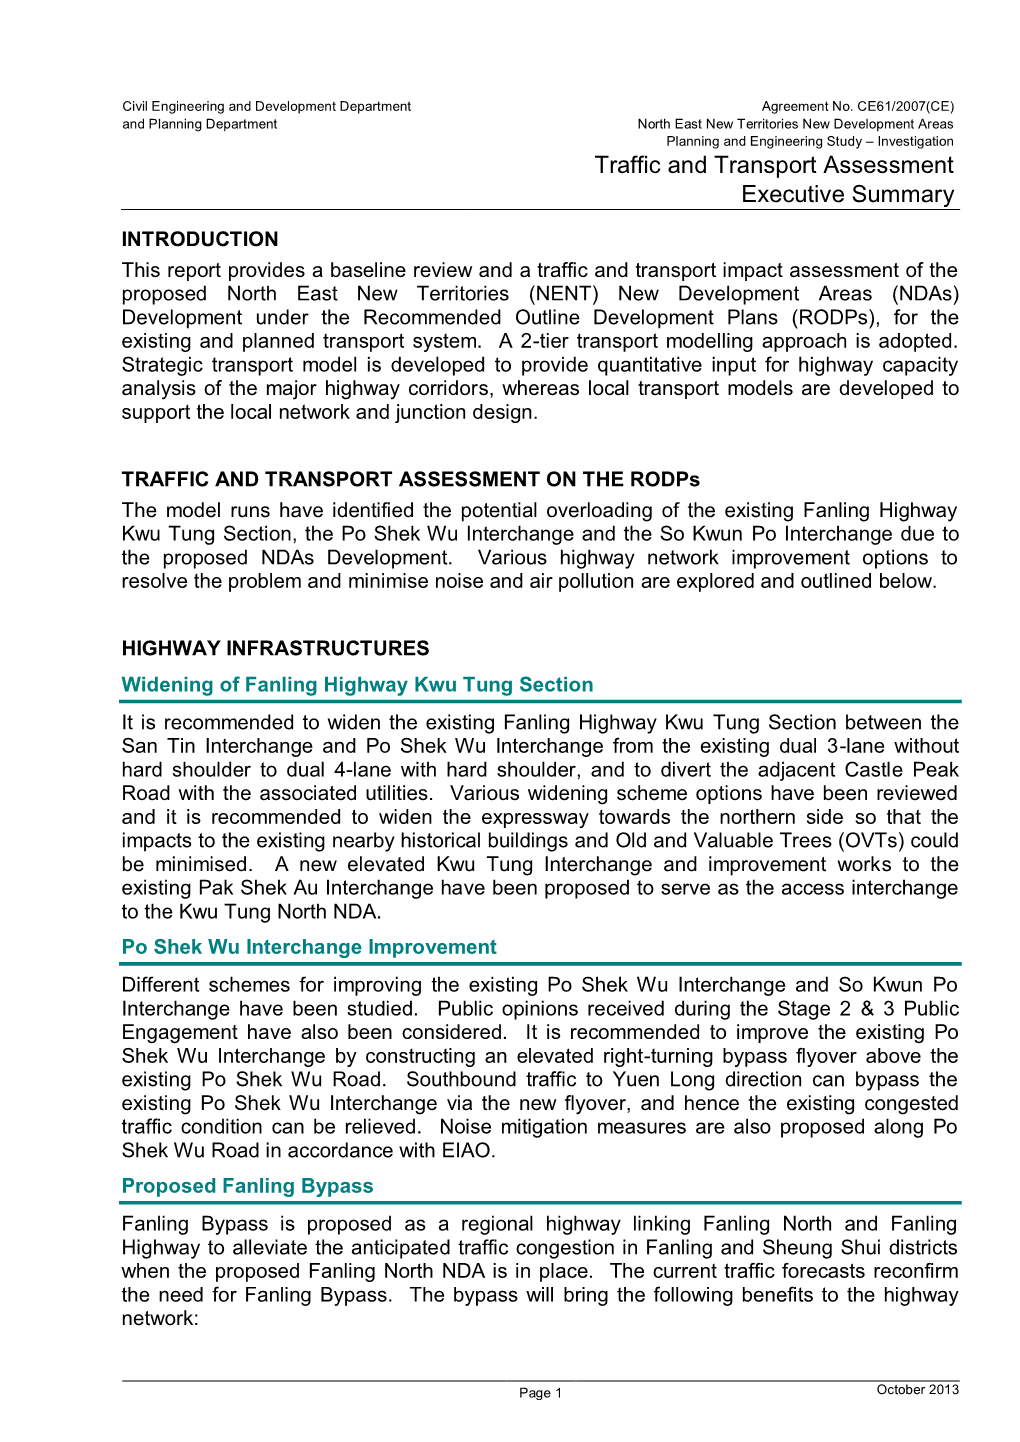 Executive Summary of Technical Report on Traffic and Transport